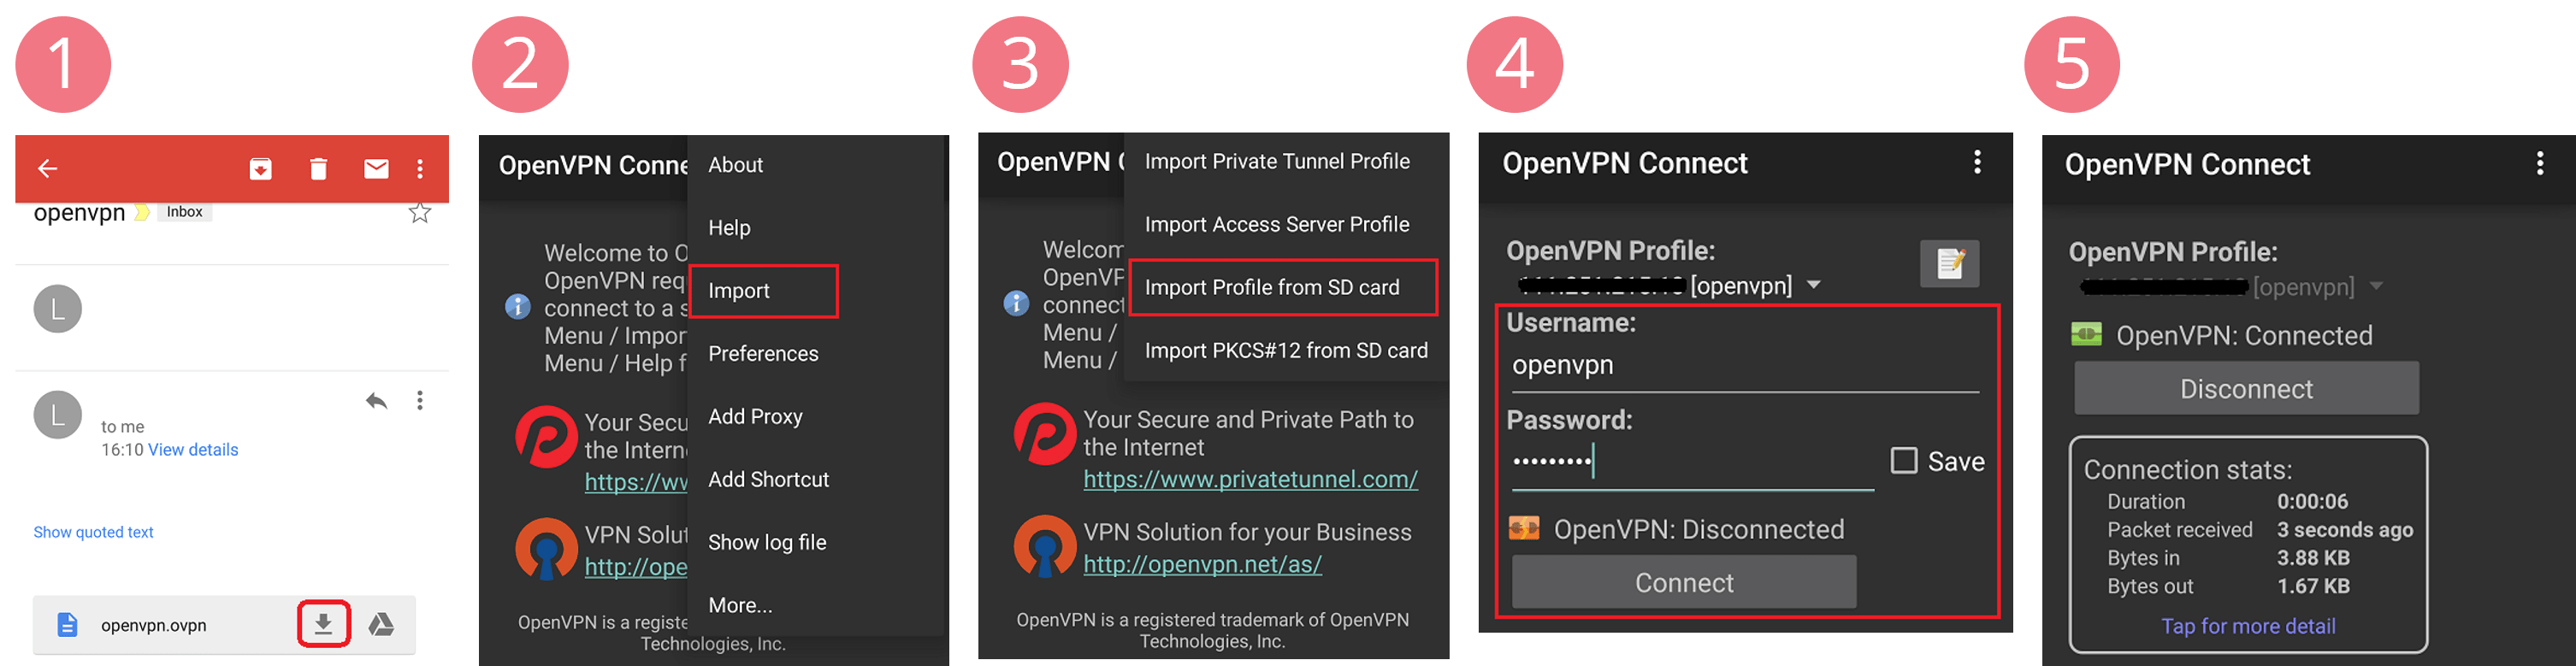 screenshots of Android OpenVPN connect